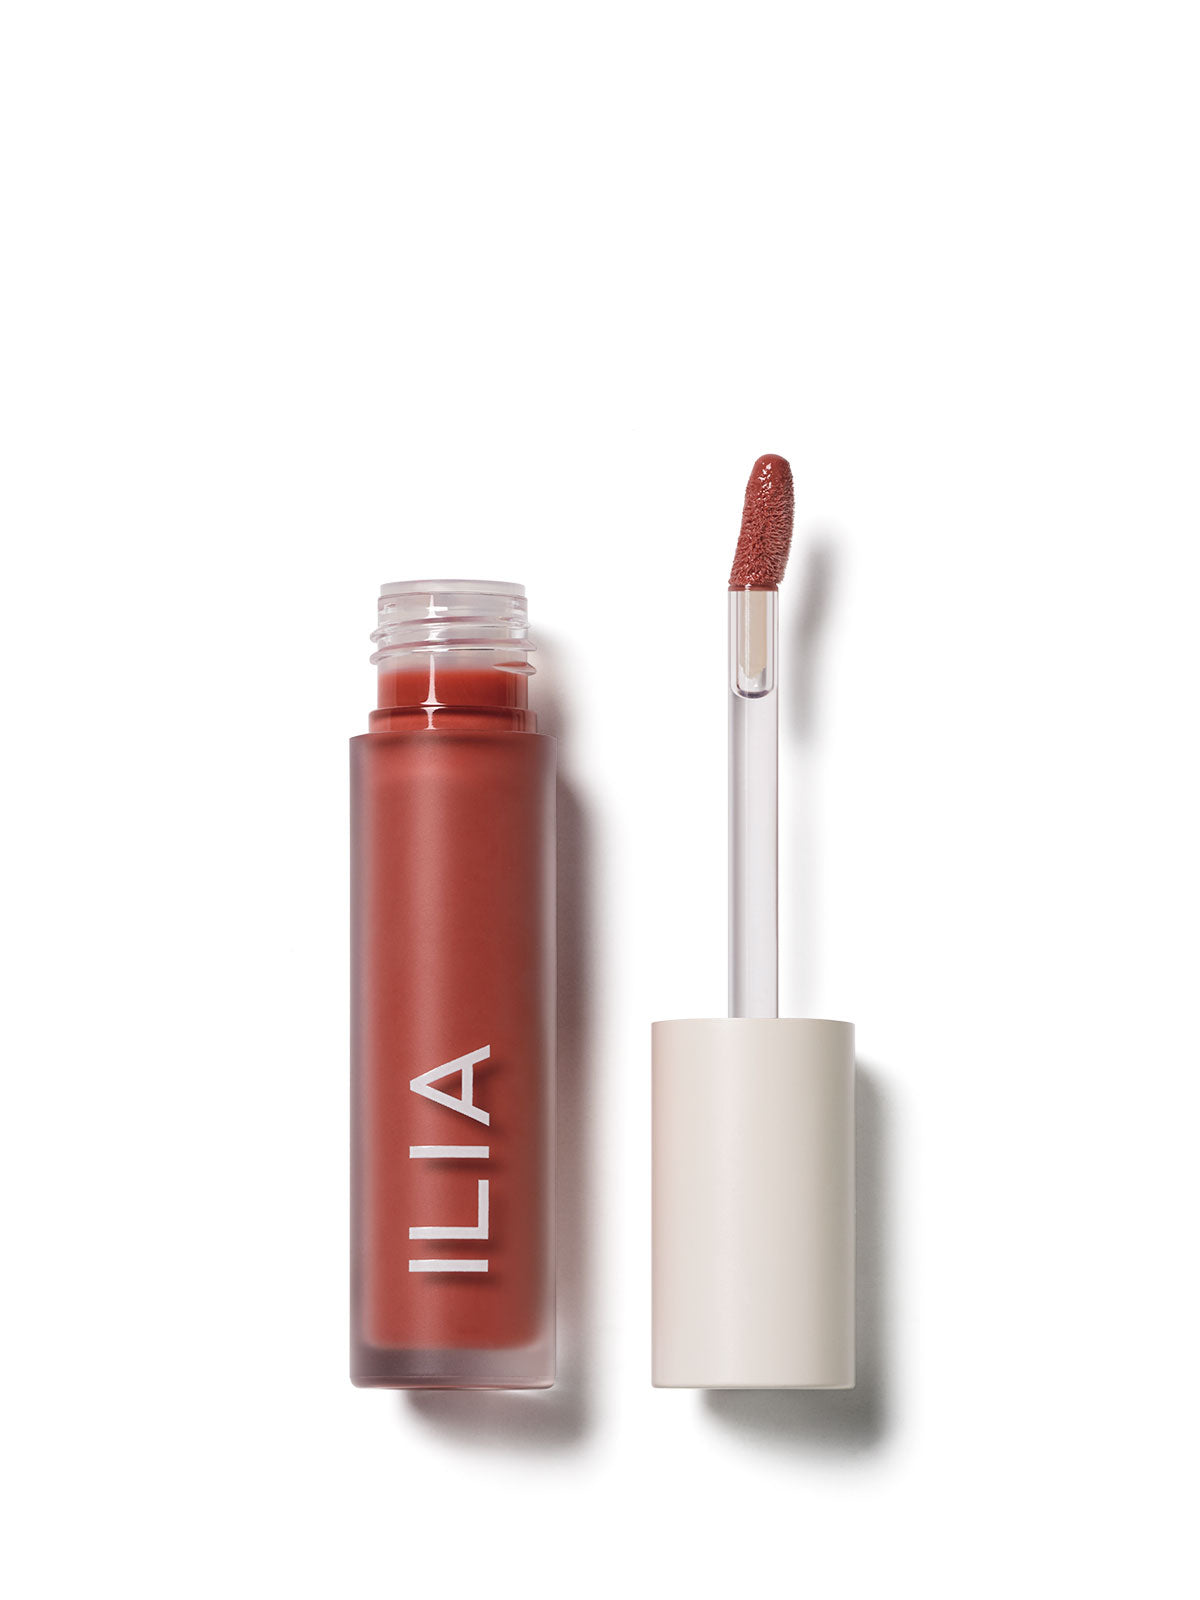 14 Lipsticks, Glosses, and Balms That Are Essential for Fall